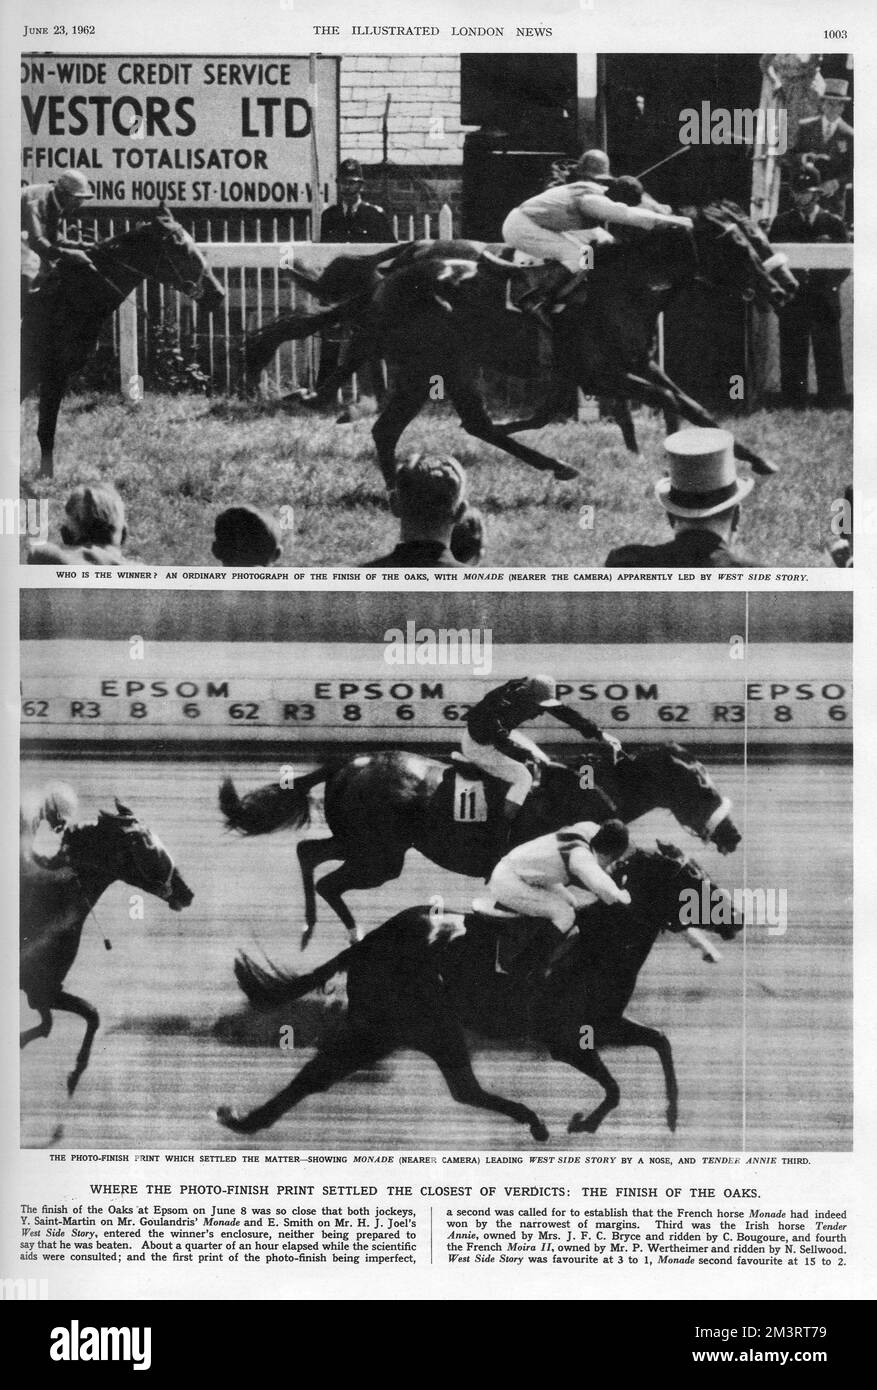 A page from The Illustrated London News showing a diagram by unknown photographers, comparing a single-exposure race finish to a photo finish. The race pictured is the finish of the Oaks at Epsom on 8th June 1962, in which the French horse Monade beat West Side Story by the narrowest of margins(hotly followed by Irish horse Tender Annie). The context victory was settled using a photo finish print of the event, the lower image on this page.     Date: 1962 Stock Photo